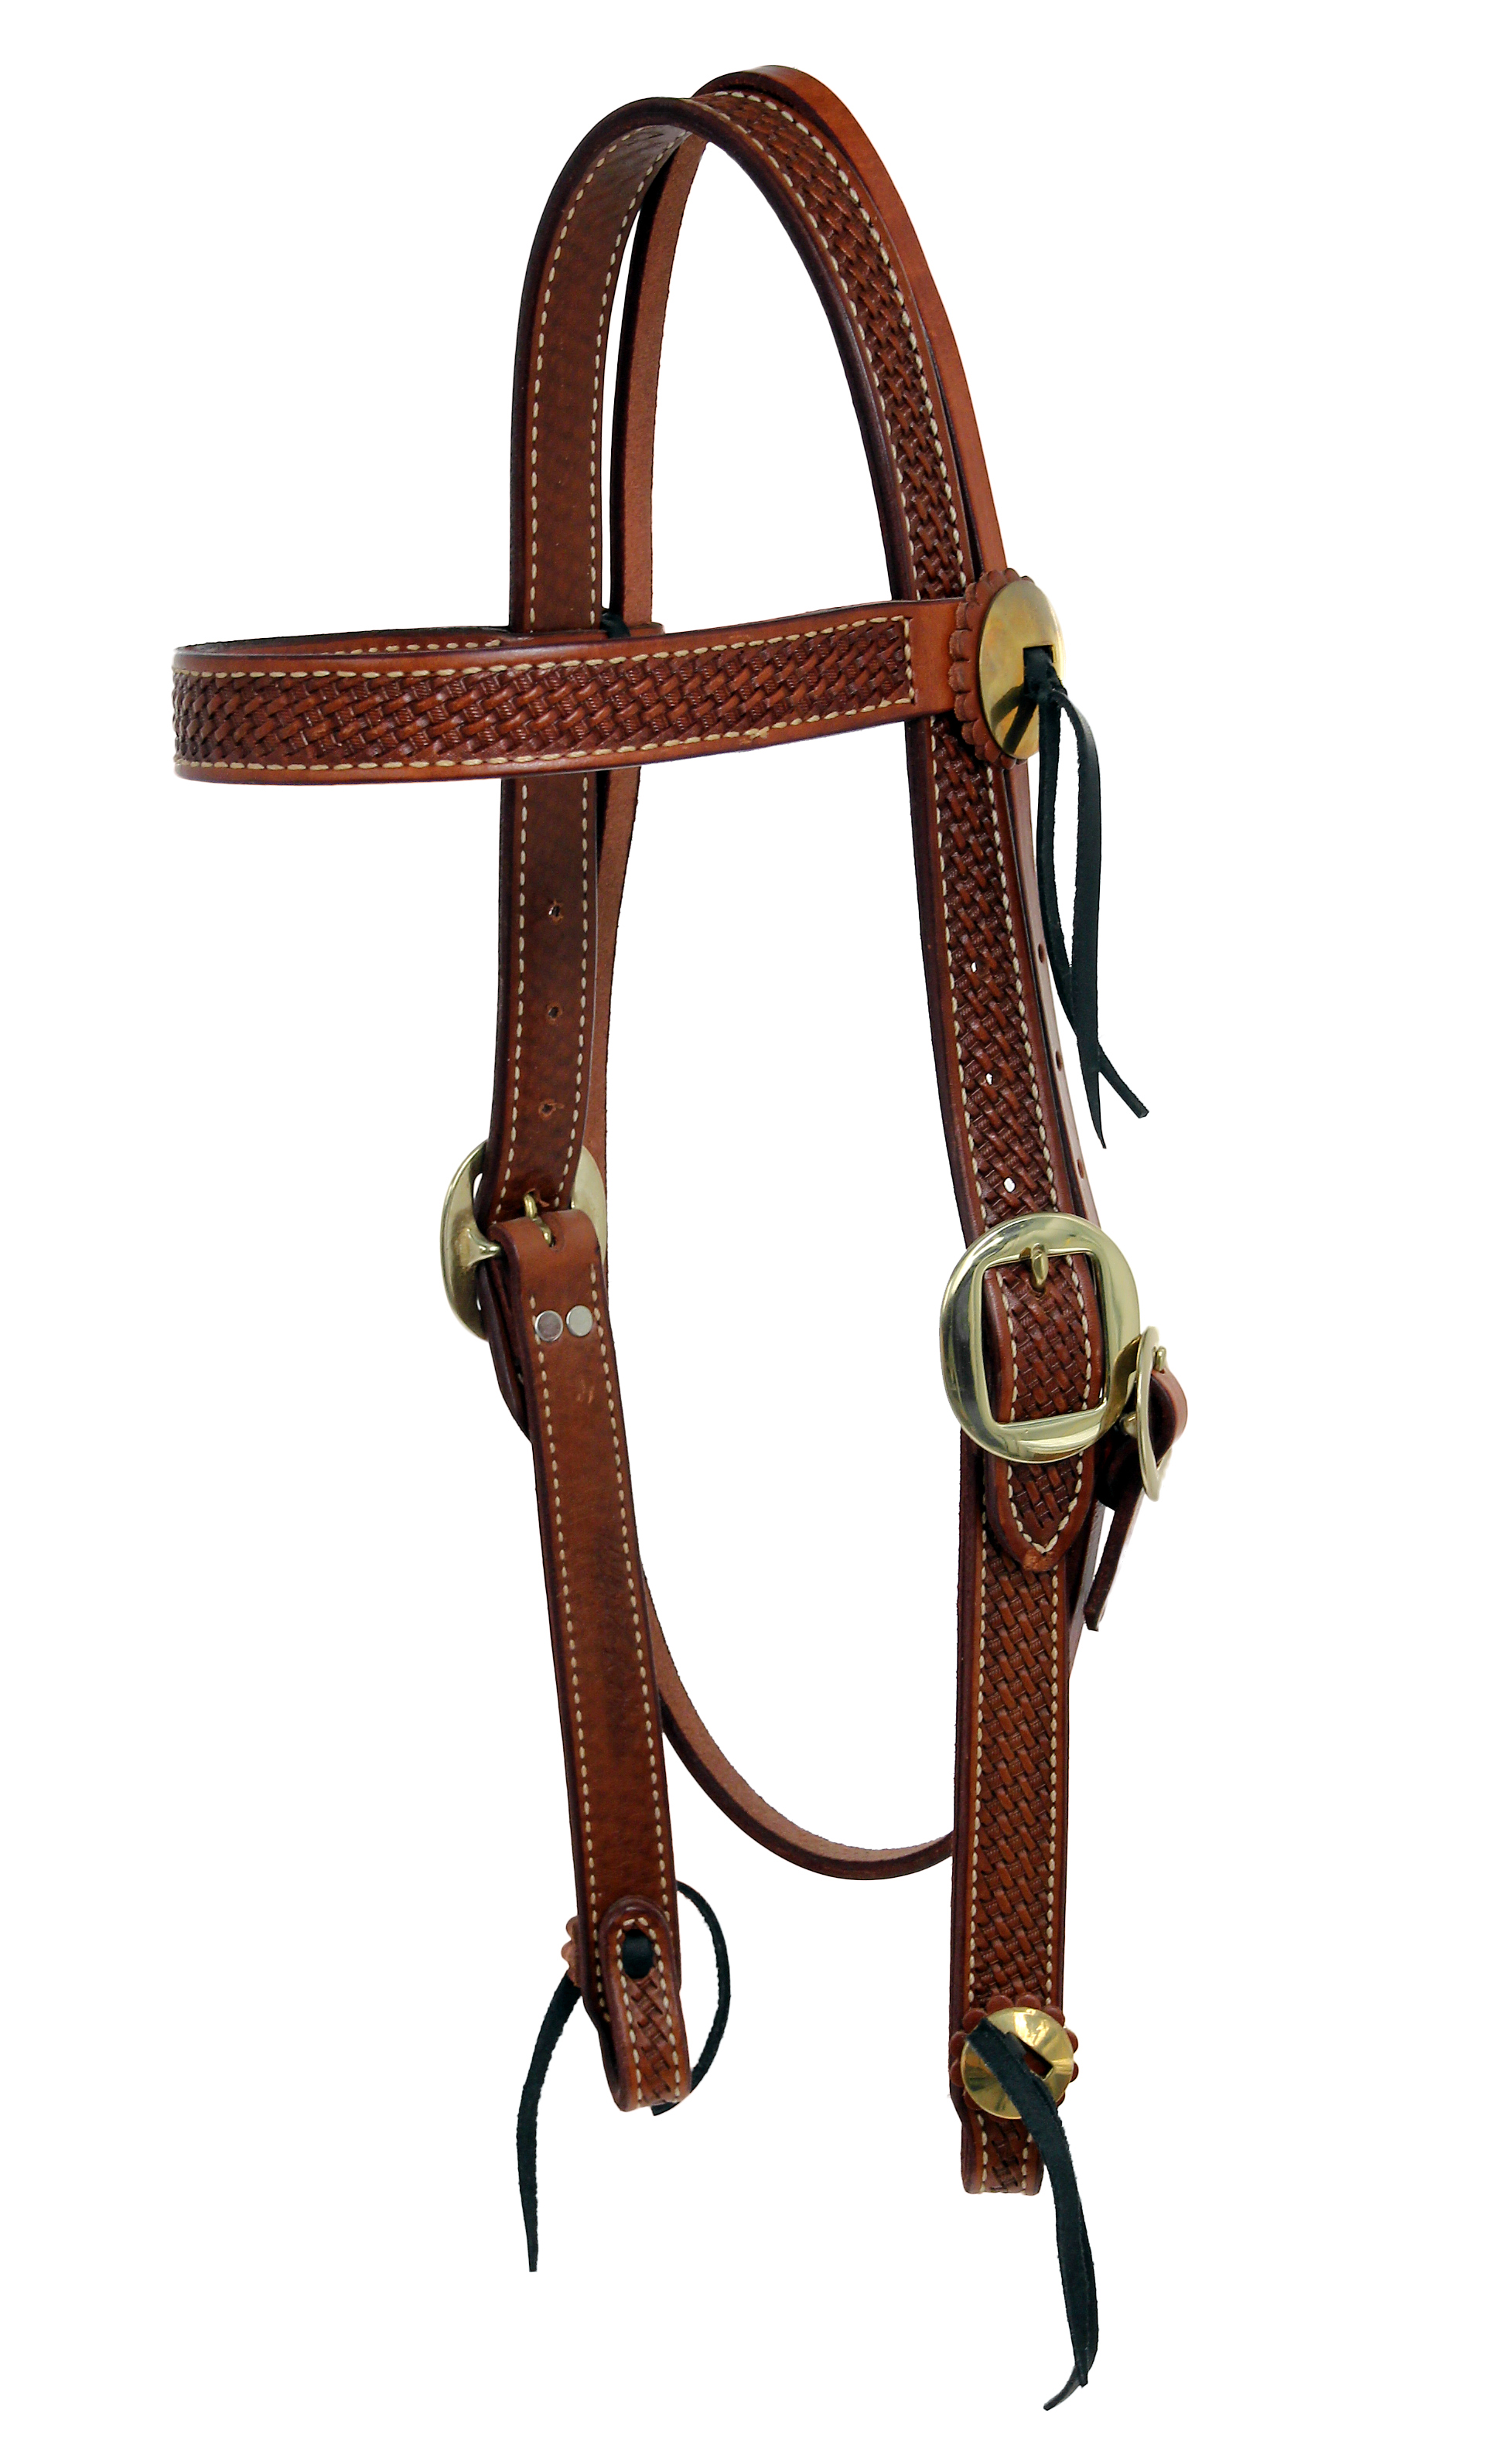 Billy Cook Basketweave Browband Headstall 11-743